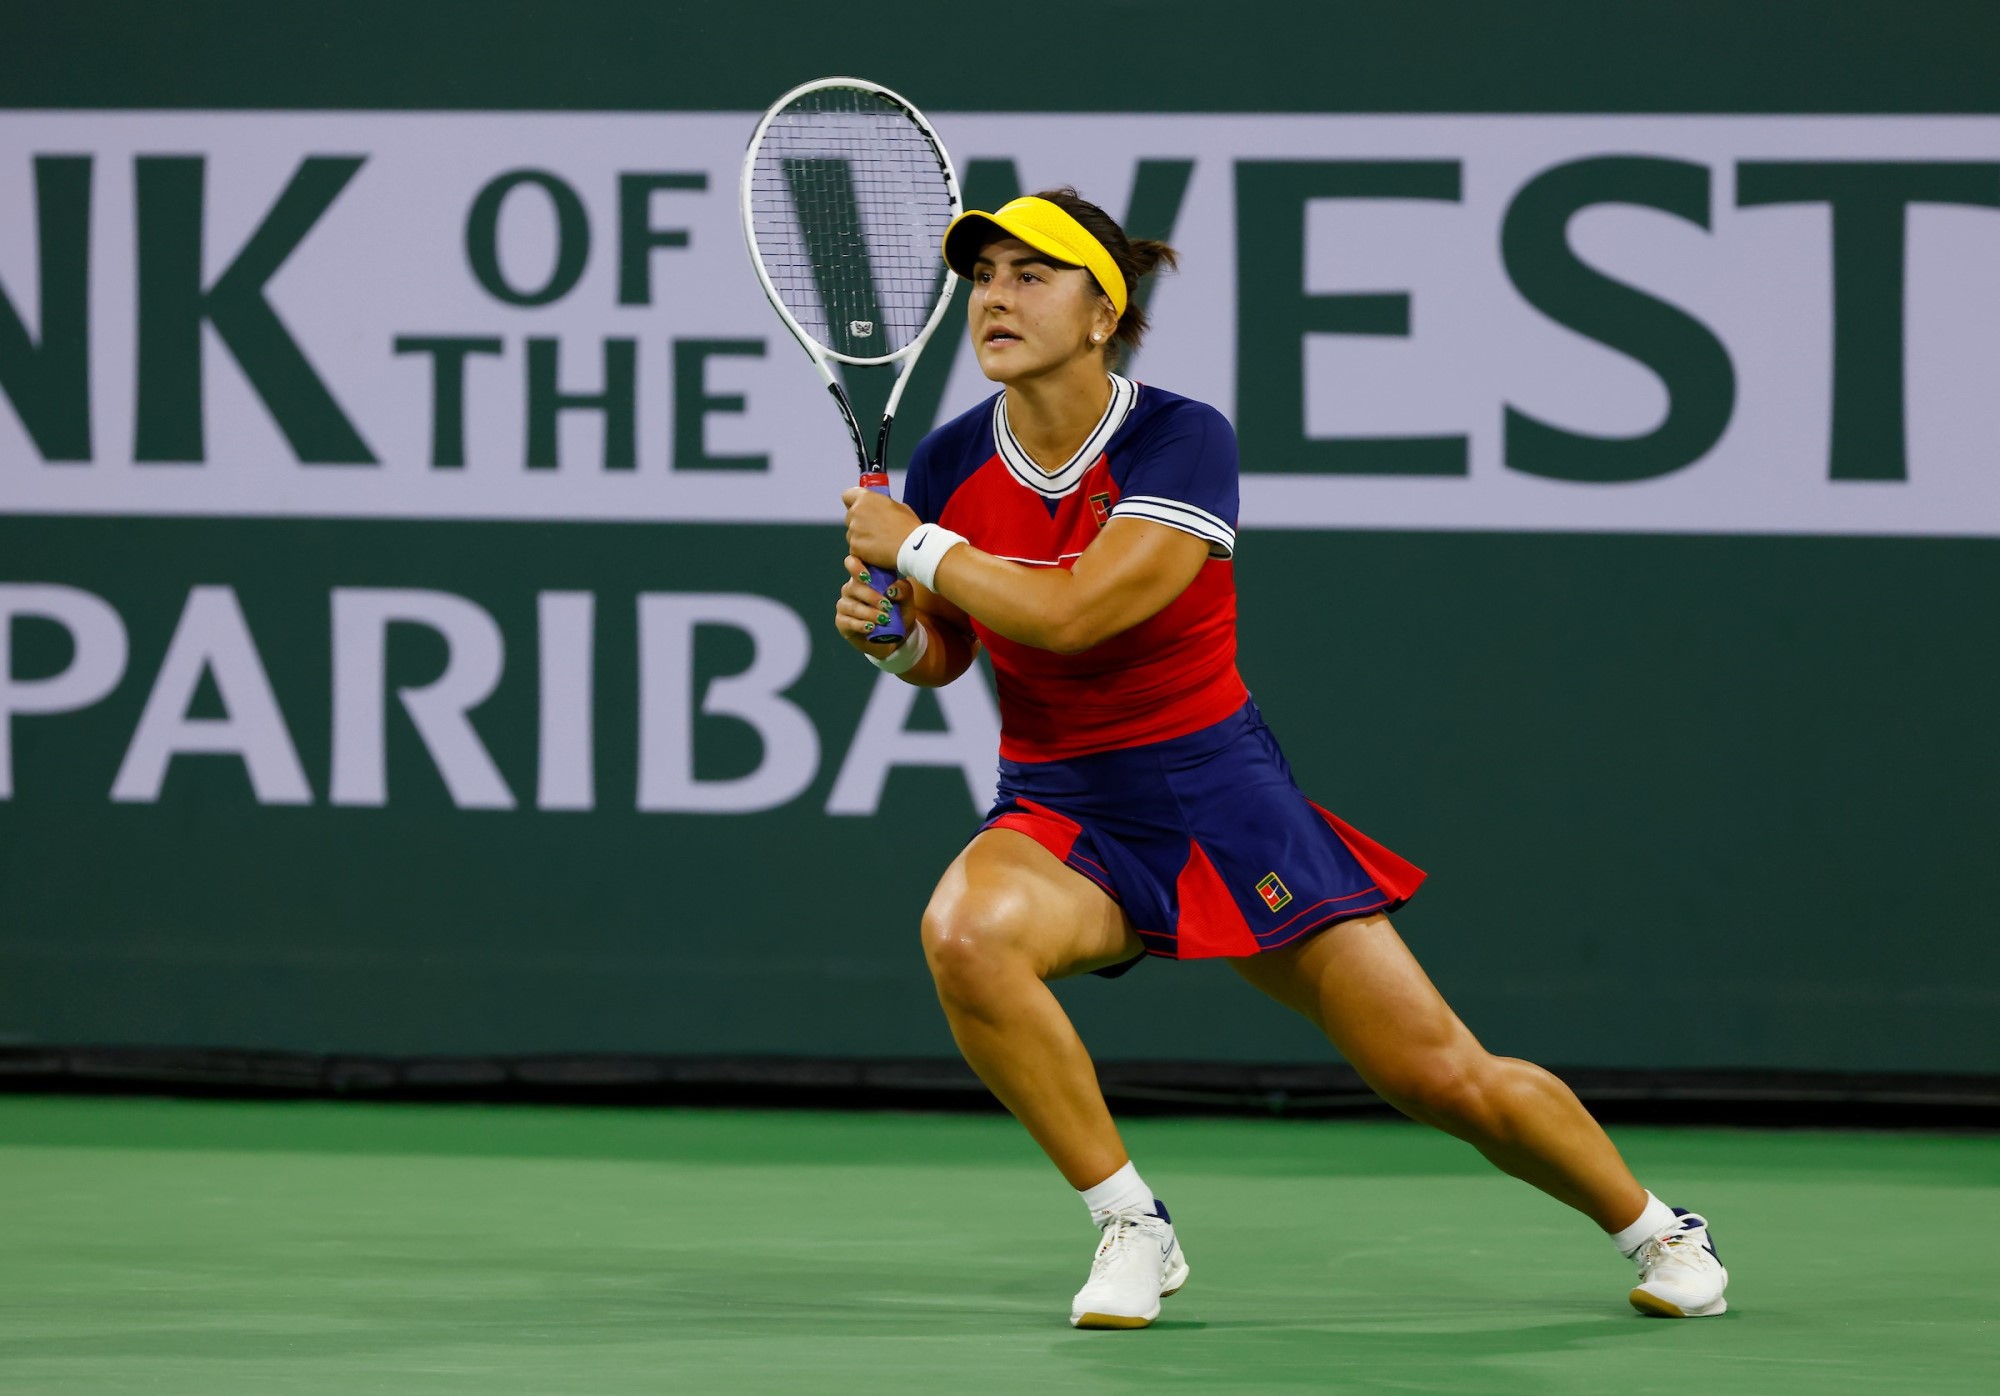 Bianca Andreescu opens with a win in Indian Wells